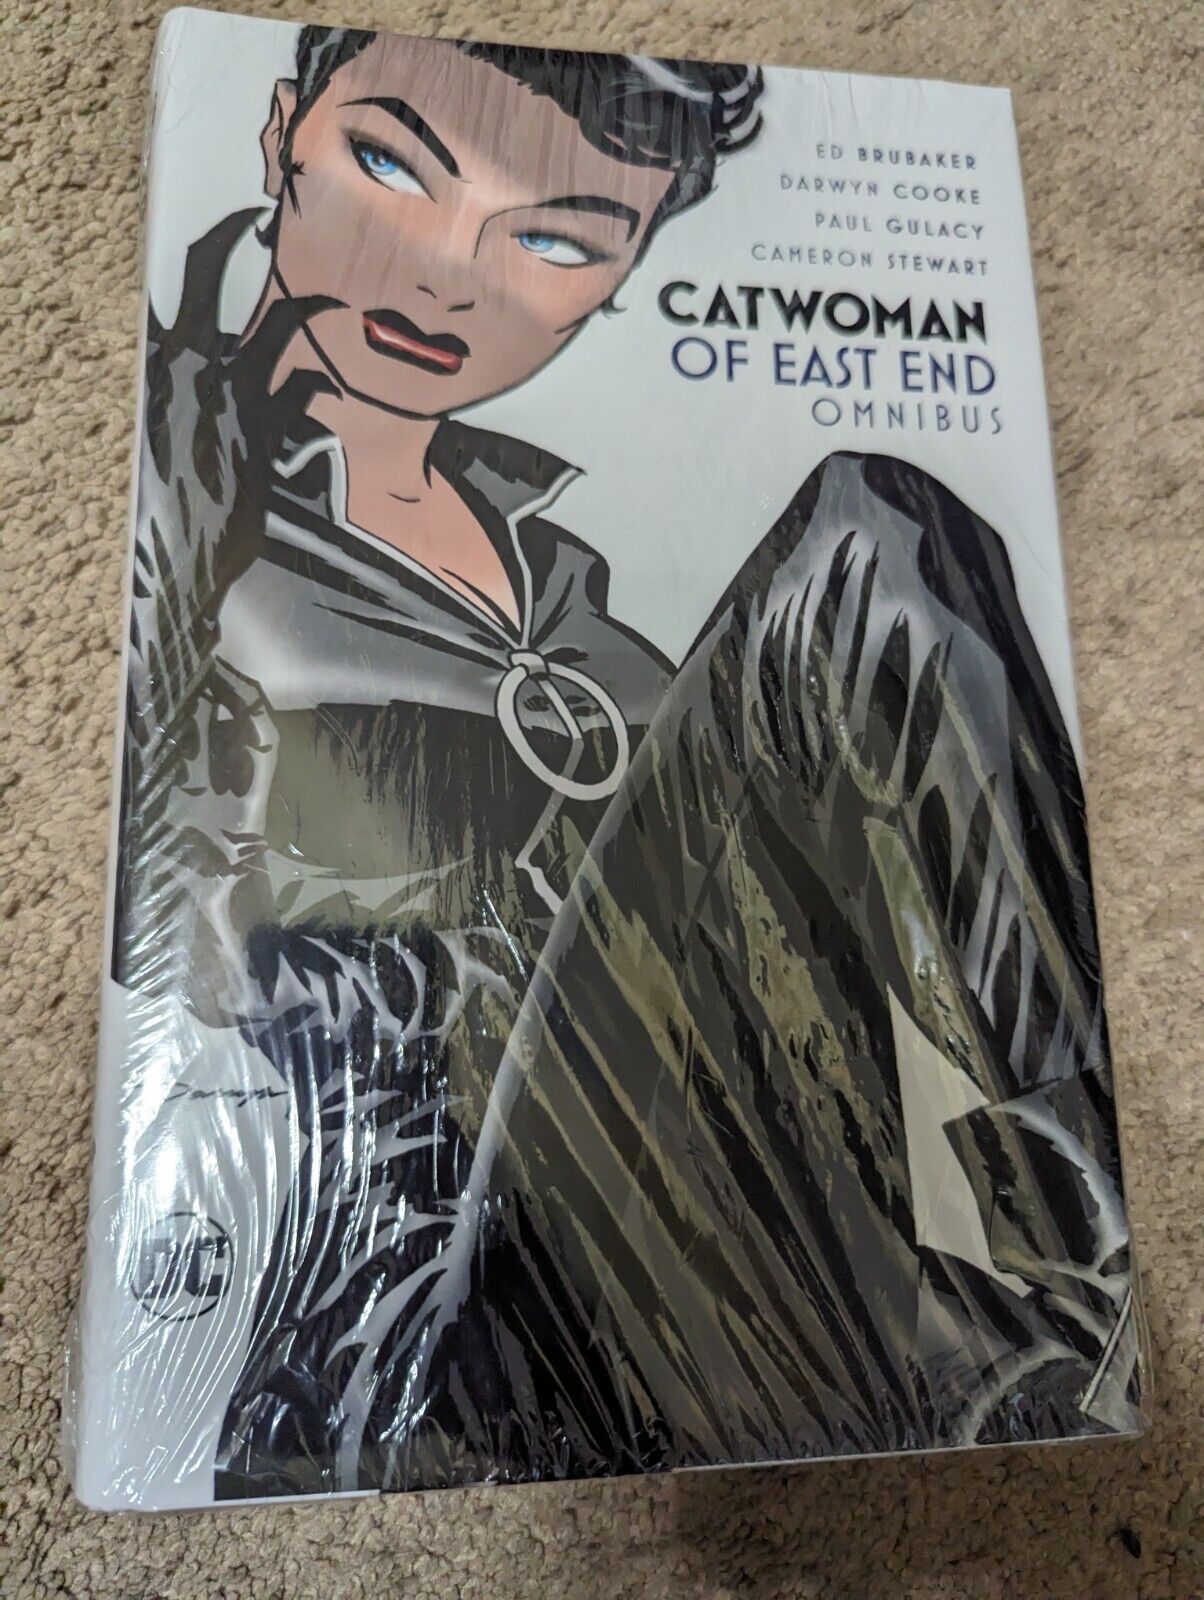 Catwoman Of East End Omnibus New DC Comics HC Hardcover Sealed $100